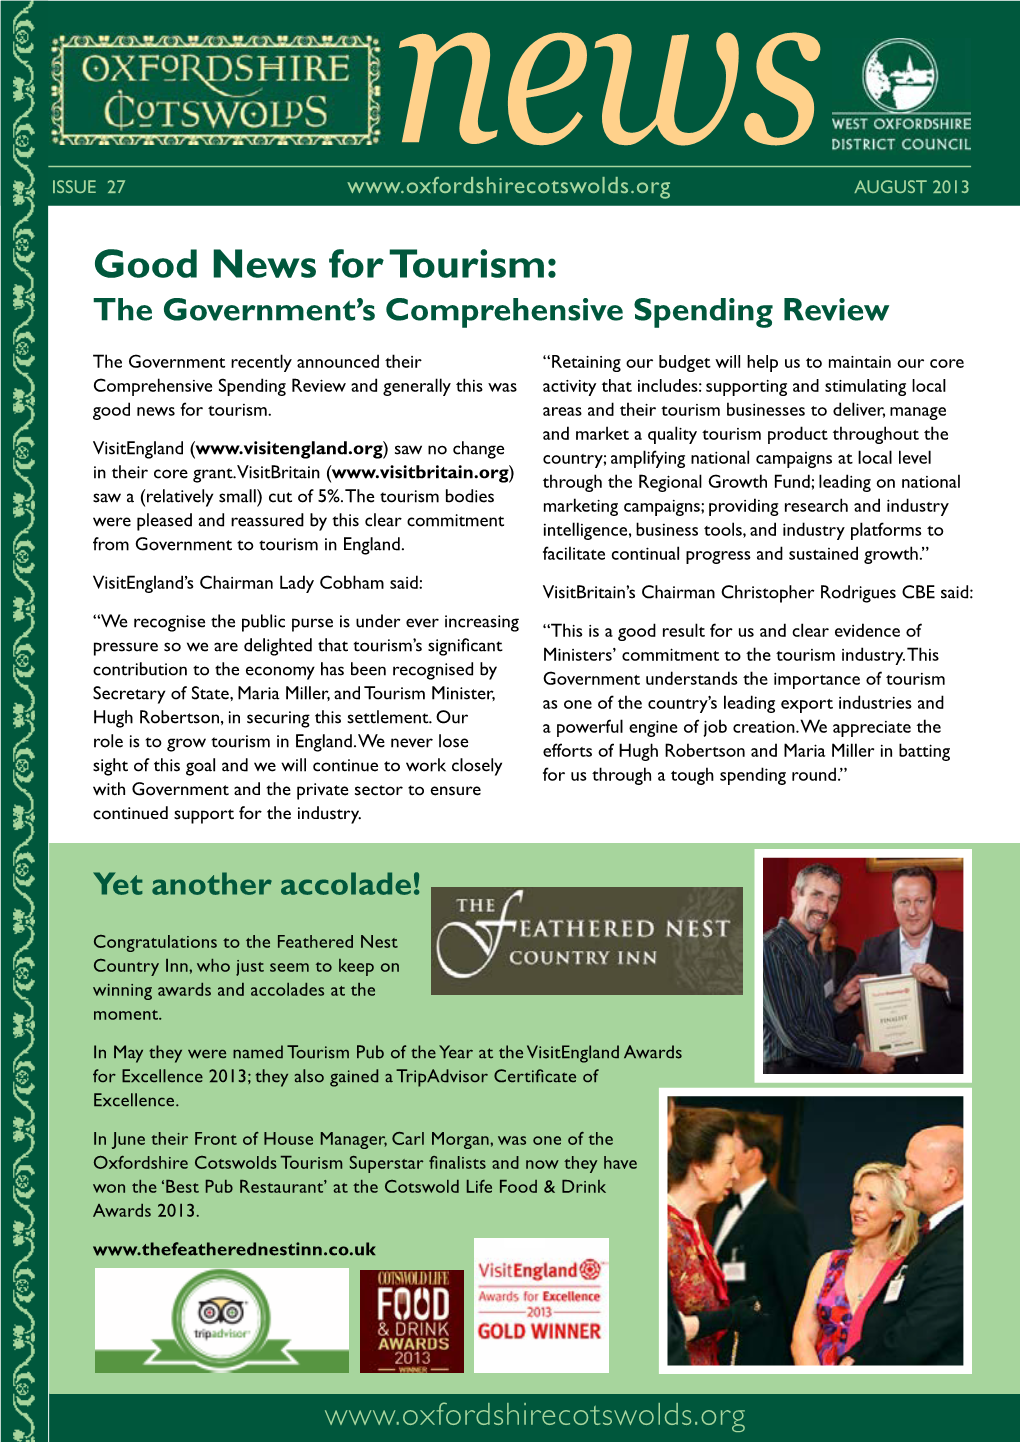 Good News for Tourism: the Government’S Comprehensive Spending Review